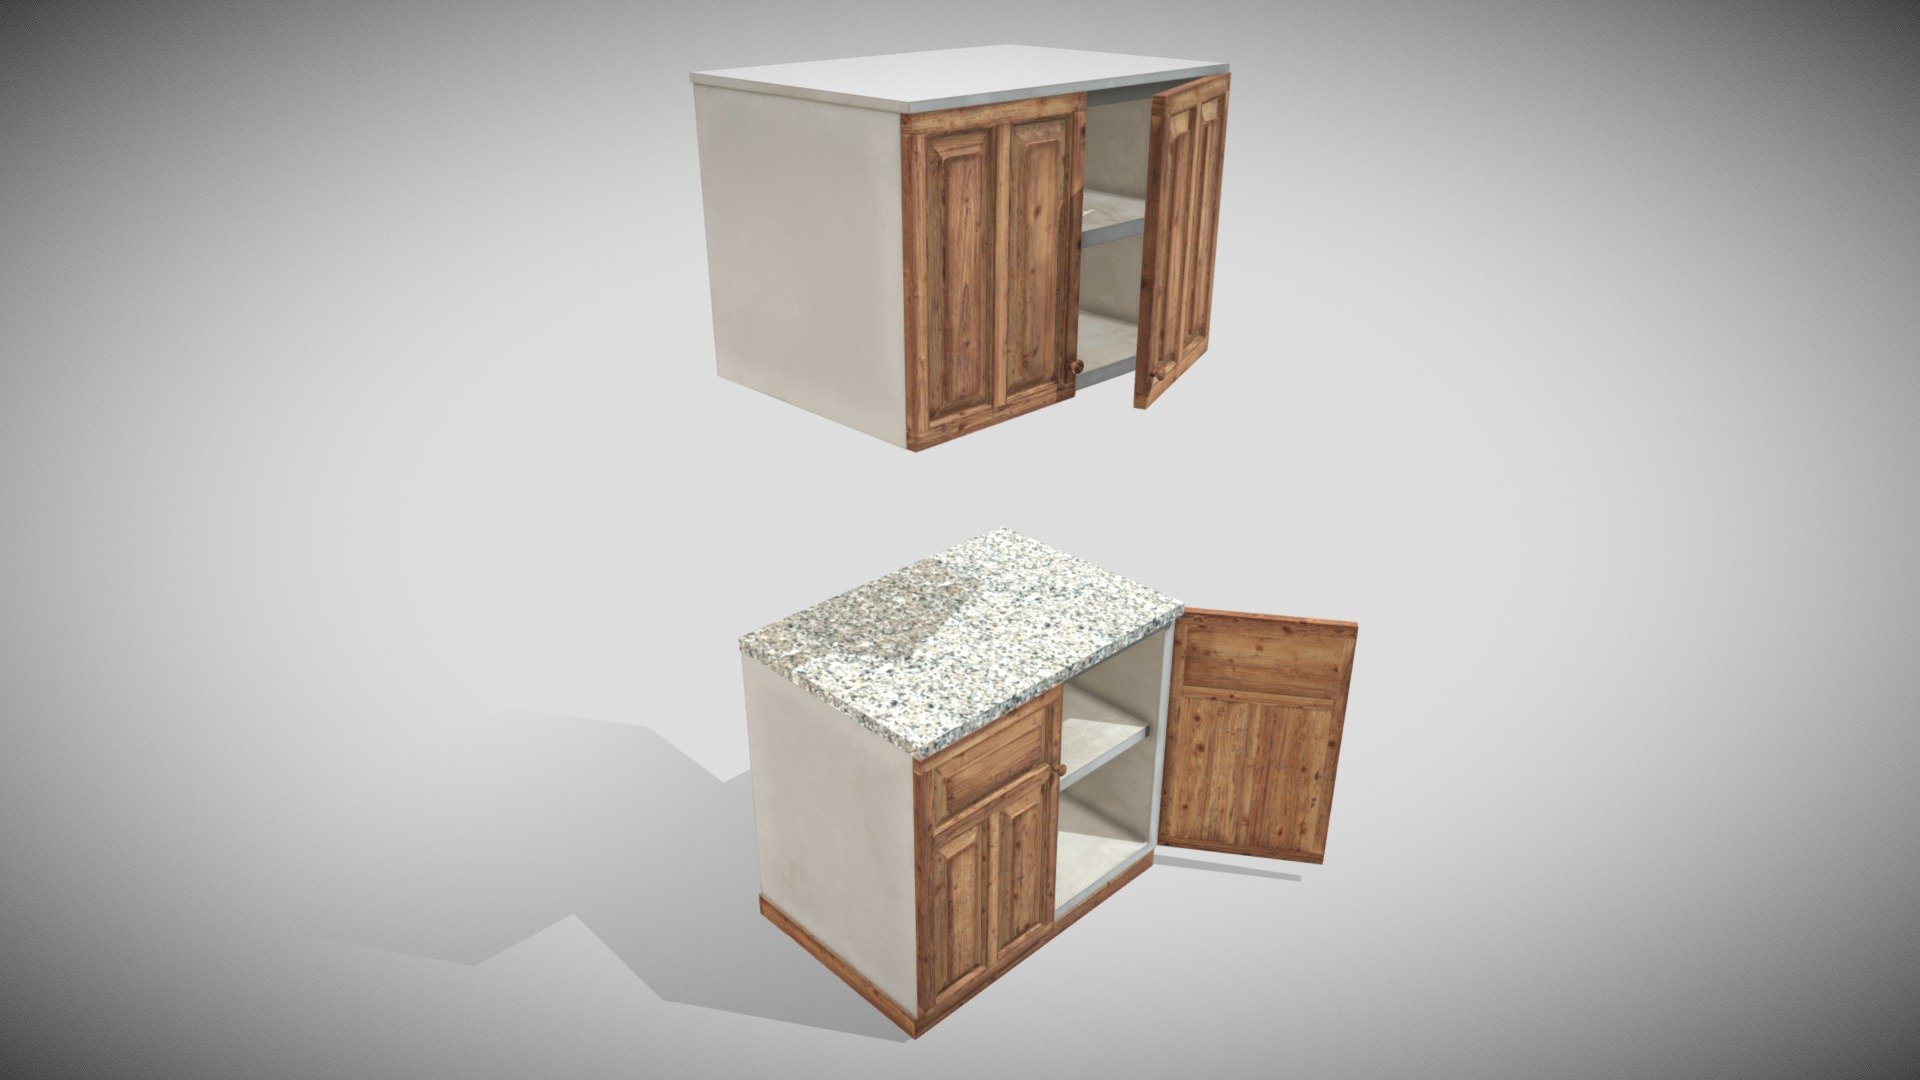 One Material PBR 4k Metalness

Pivot at Zero Bottom

Size OK

Door are separate objects with Pivot in right place and can be animated

Complete Compilatio https://skfb.ly/ovXFn - Kitchen Modules - Mod E - Buy Royalty Free 3D model by Francesco Coldesina (@topfrank2013) 3d model